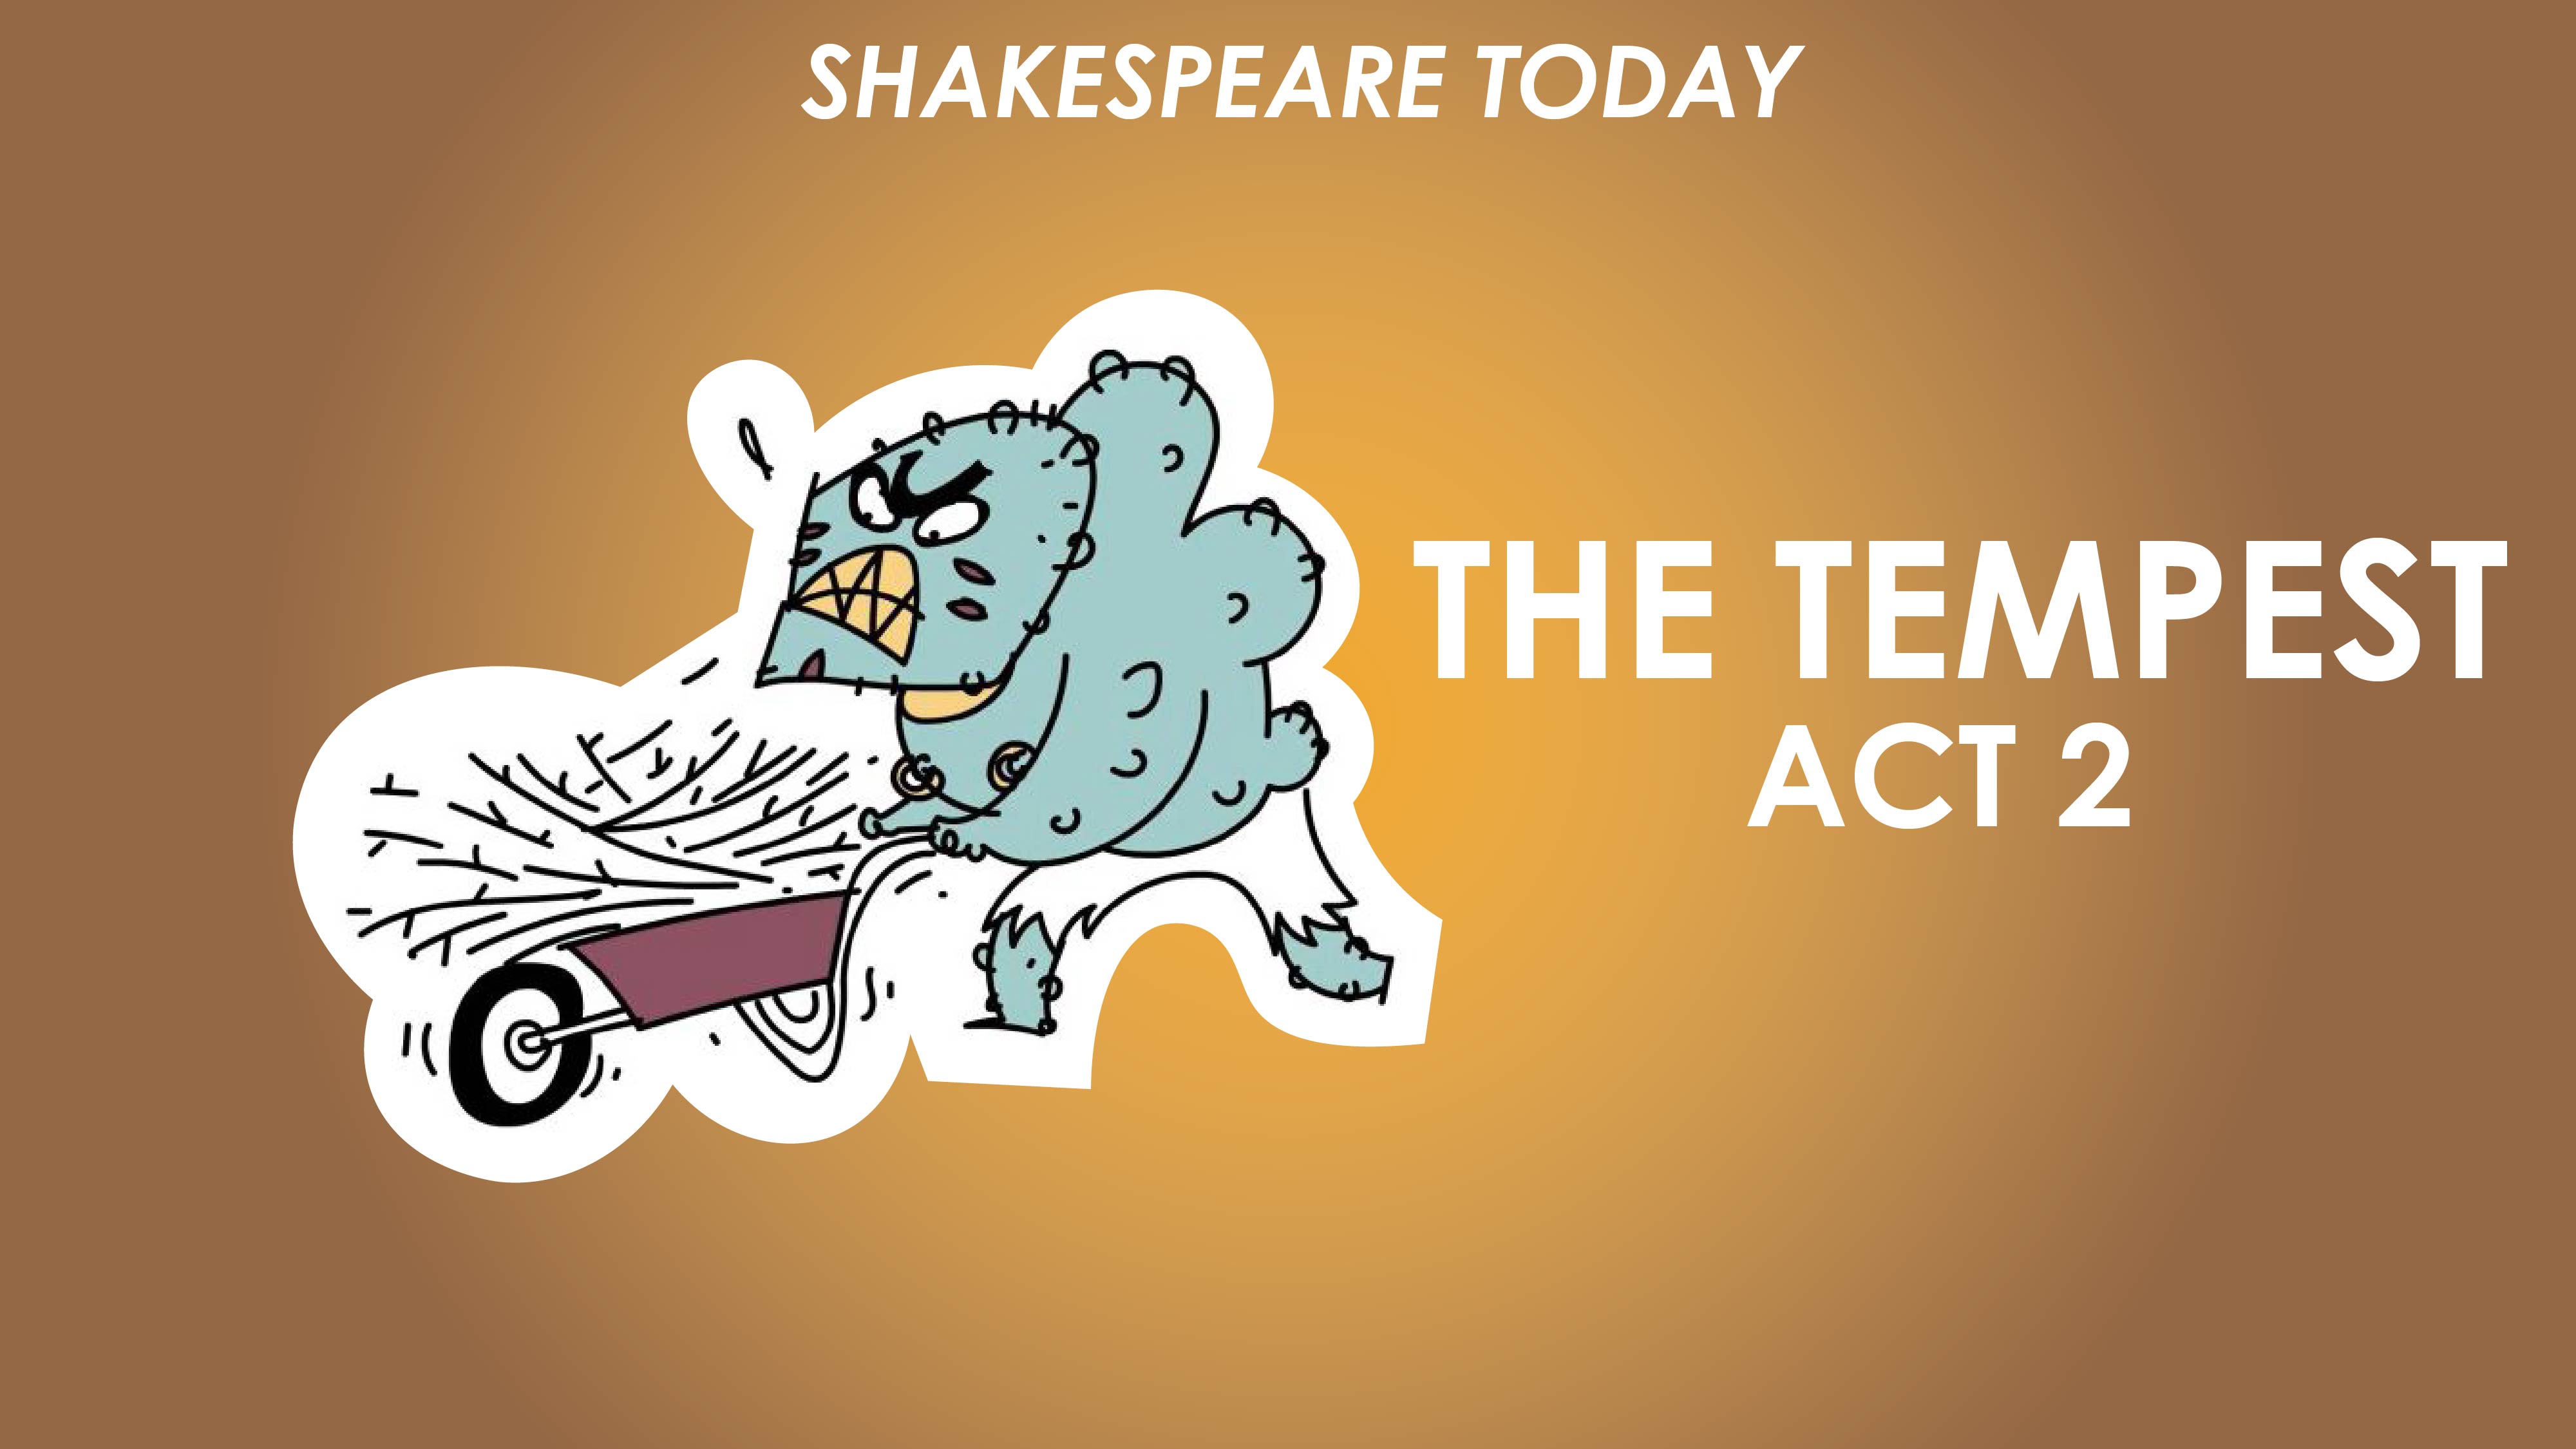 The Tempest Act 2 Summary - Shakespeare Today Series